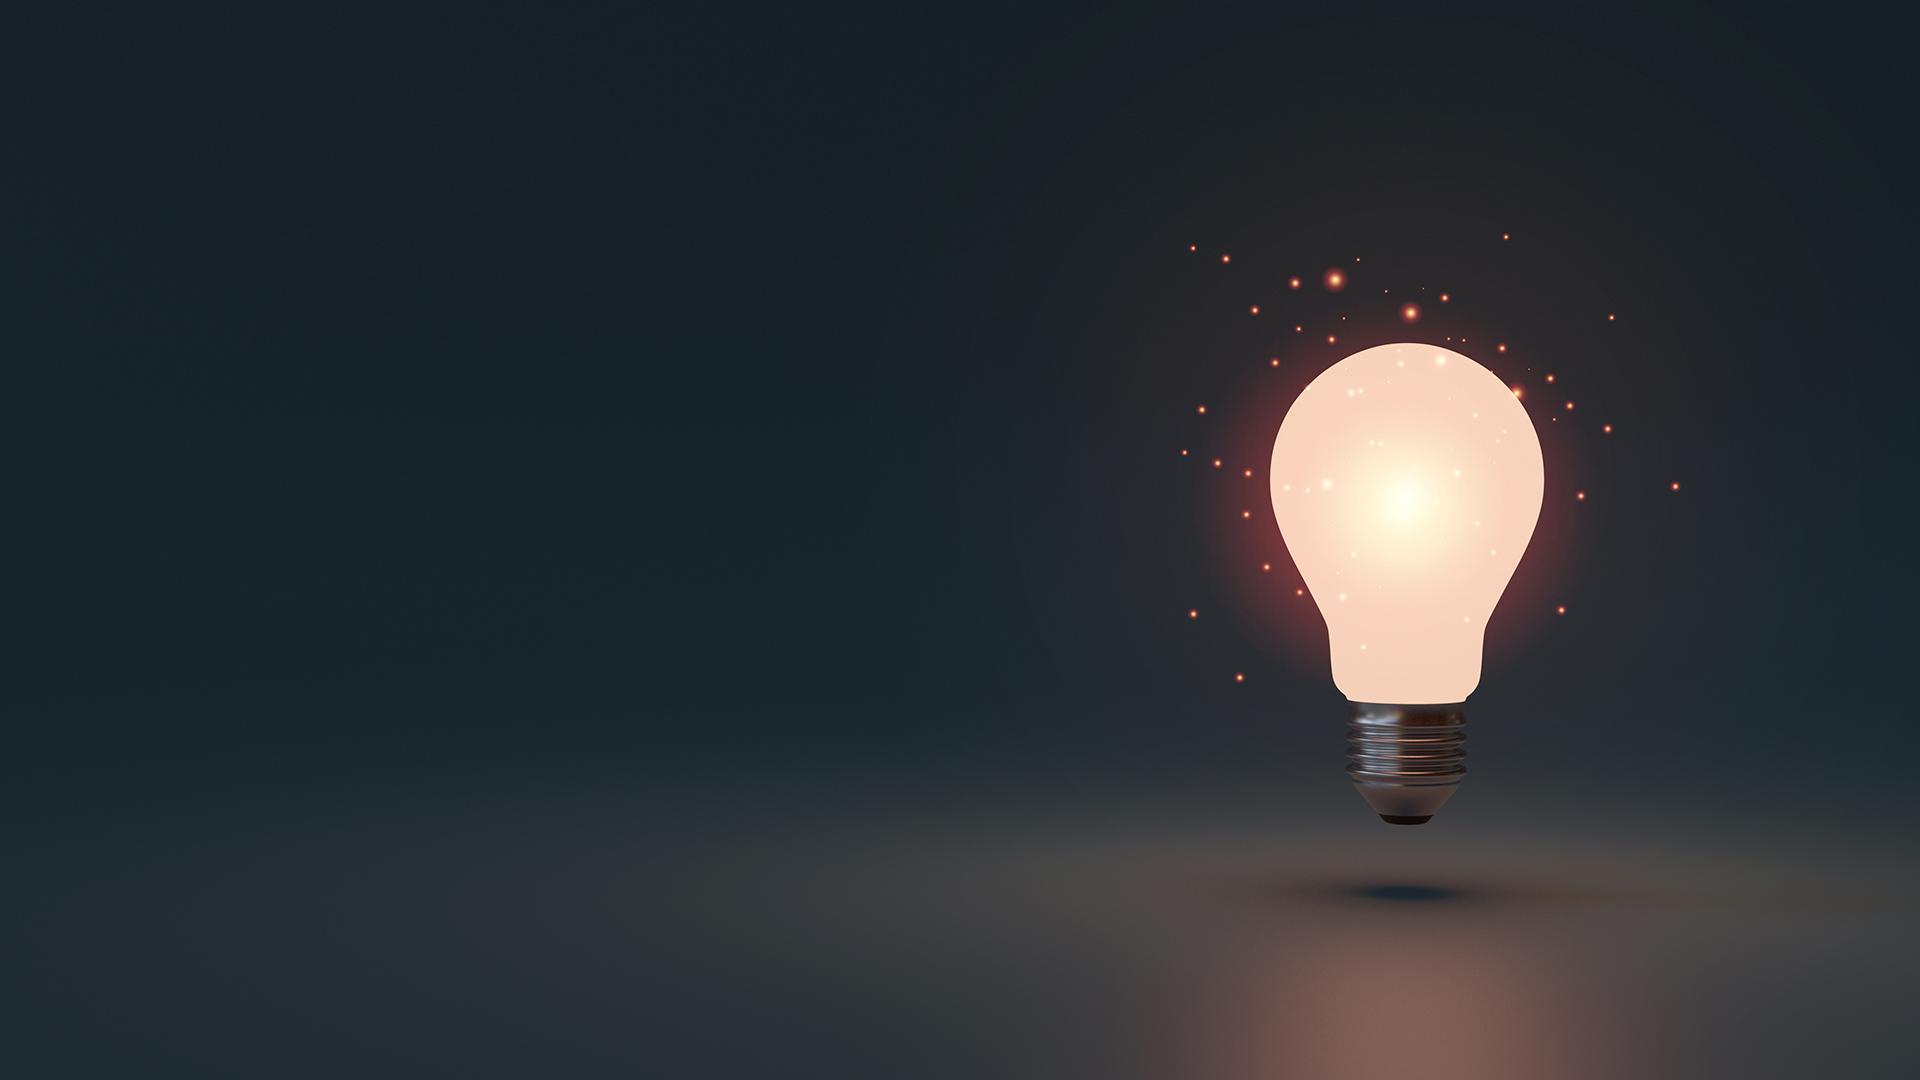 Lightbulb glowing in dark area with copy space for creative thinking and solving solution concept by 3d rendering technique.